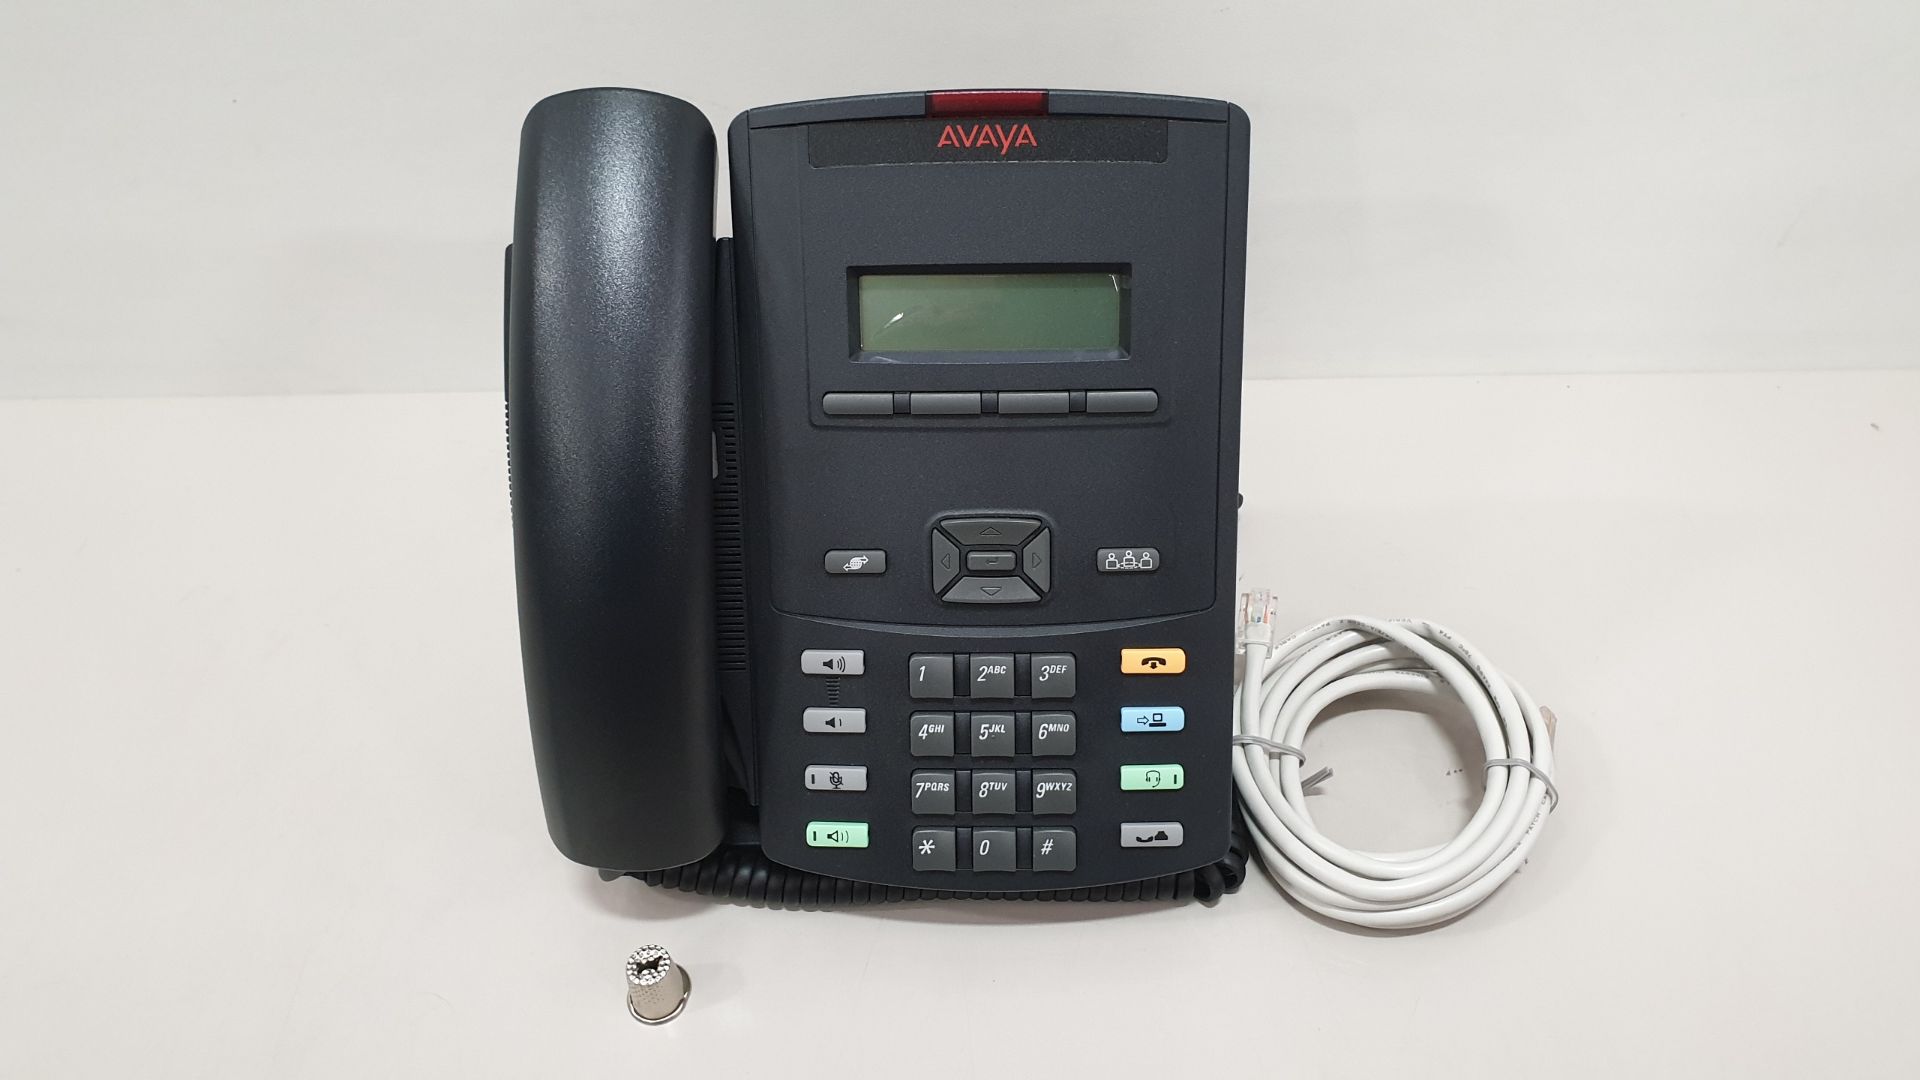 10 X BRAND NEW 1210 IP DESKPHONE, WITH ICON KEYCAPS, NO POWER SUPPLY (RoHS)